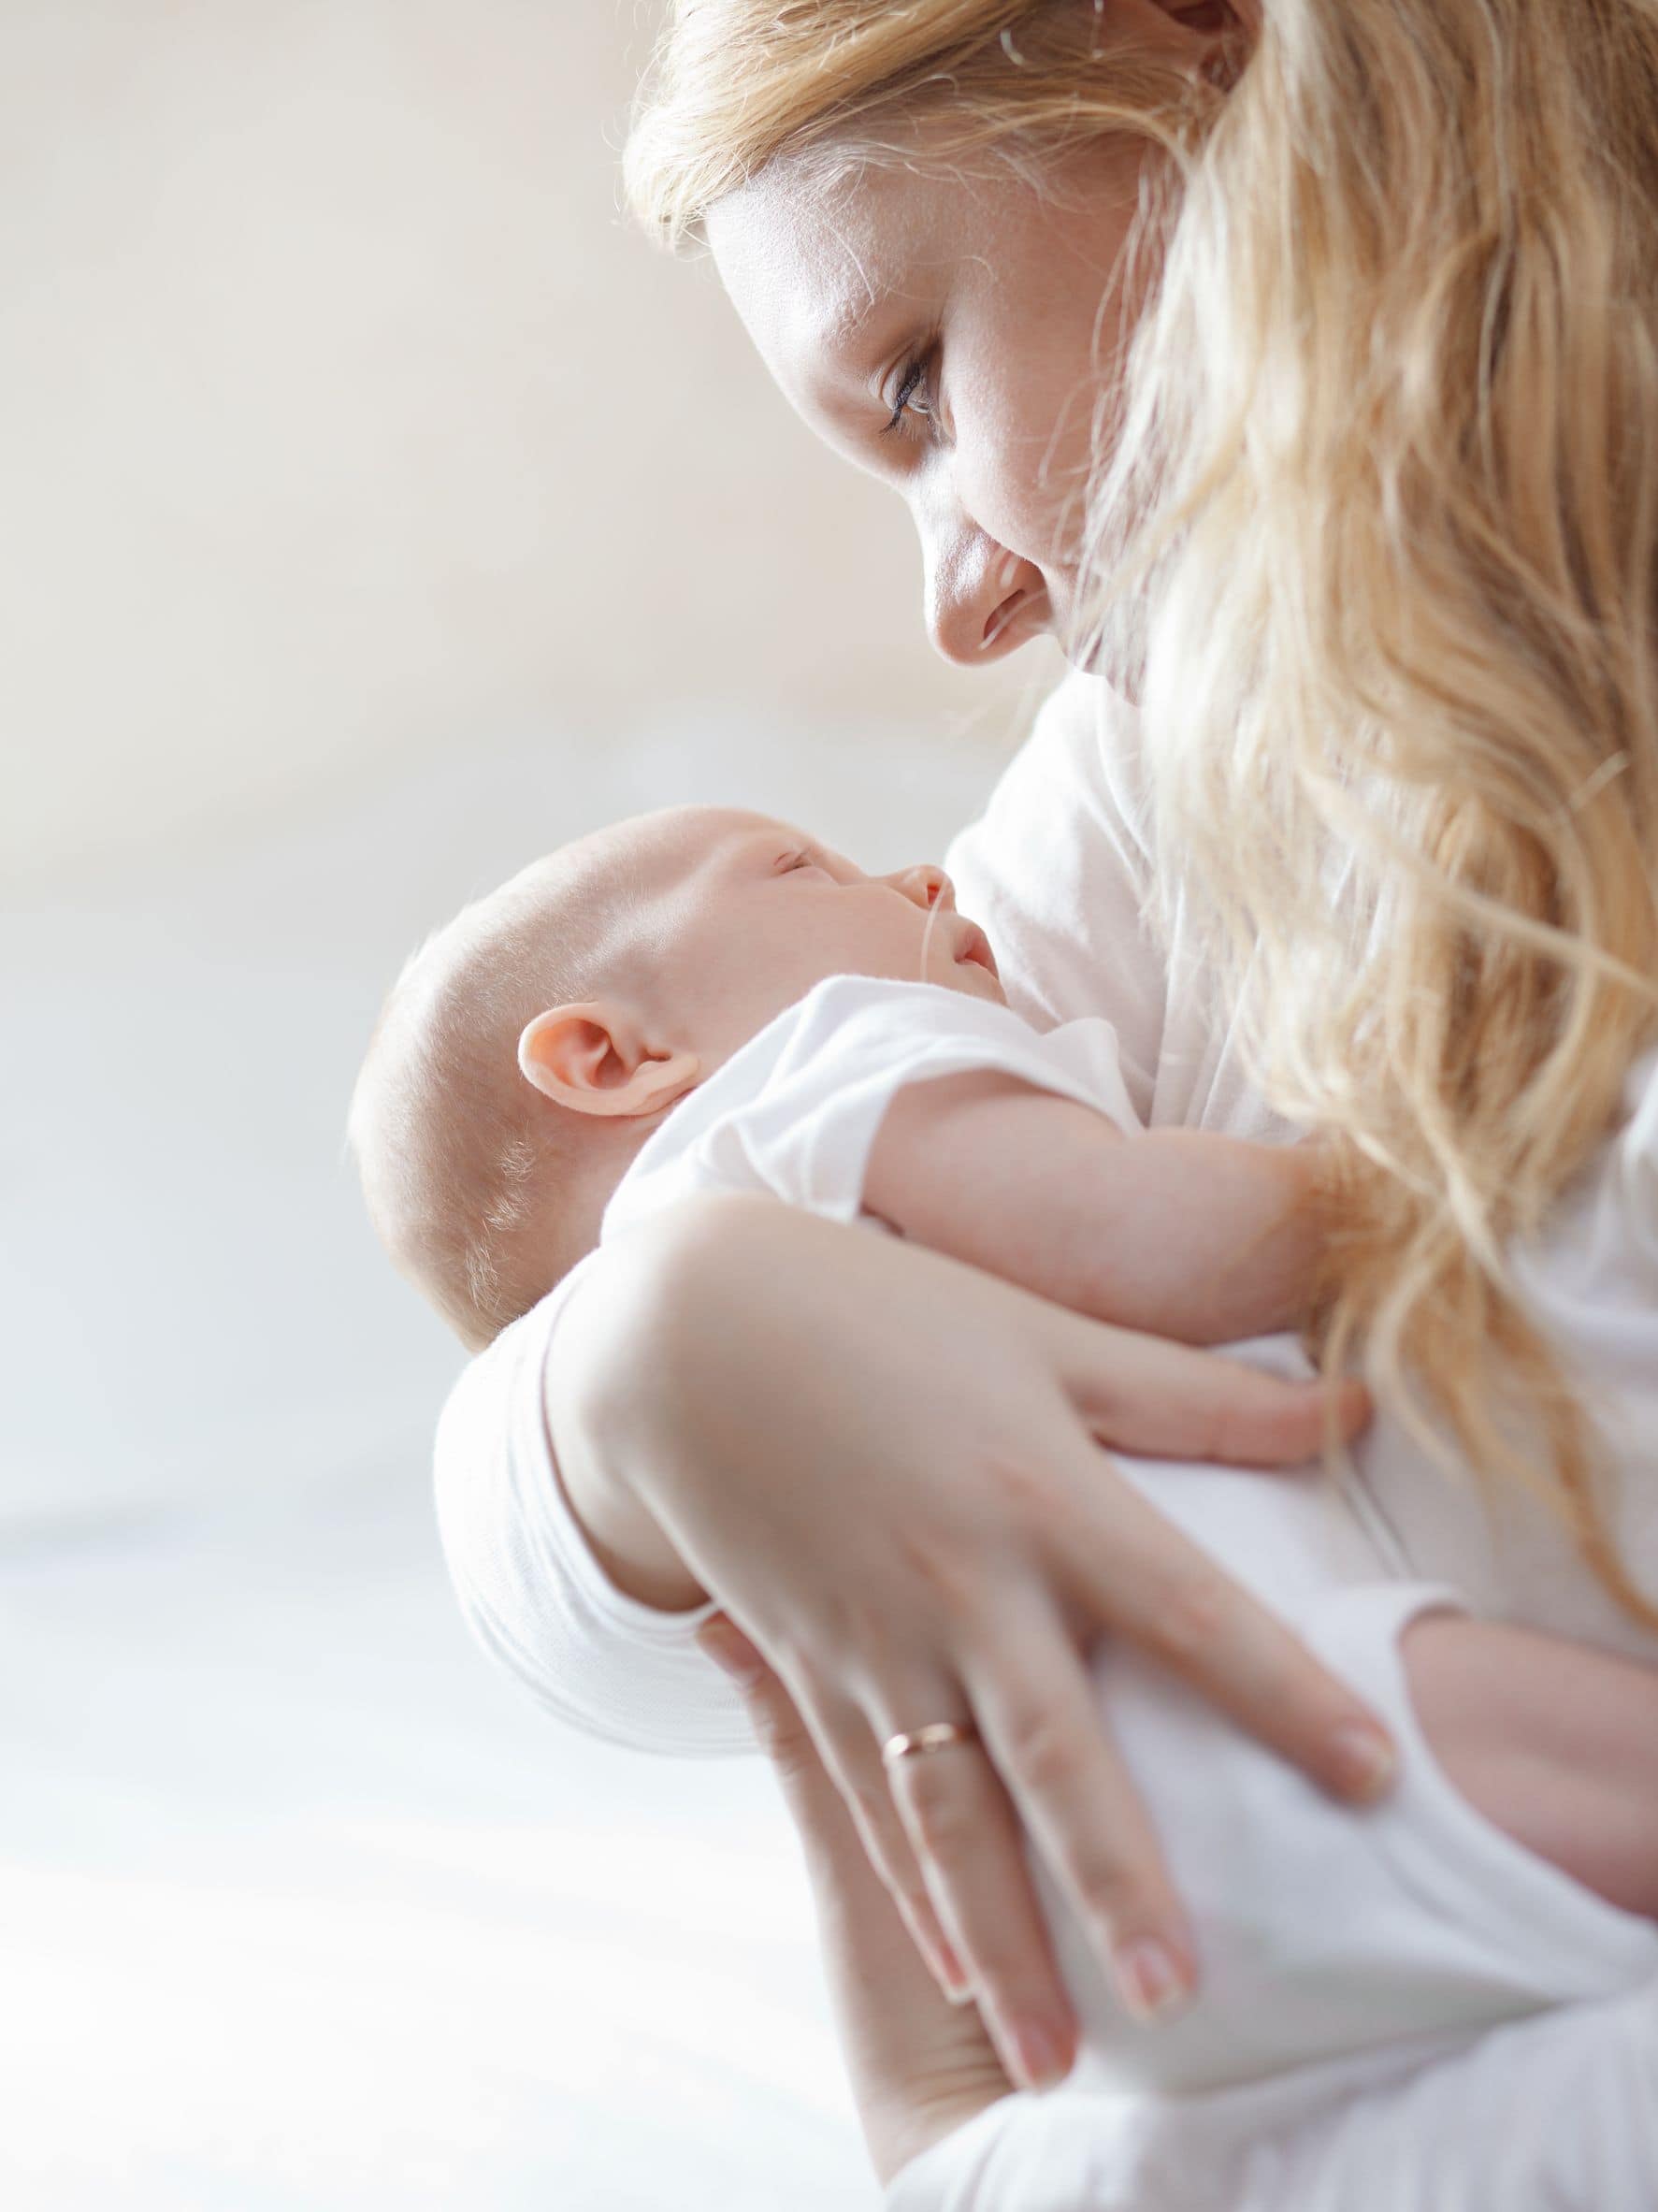 postpartum depression more common in women with vitamin D deficiency